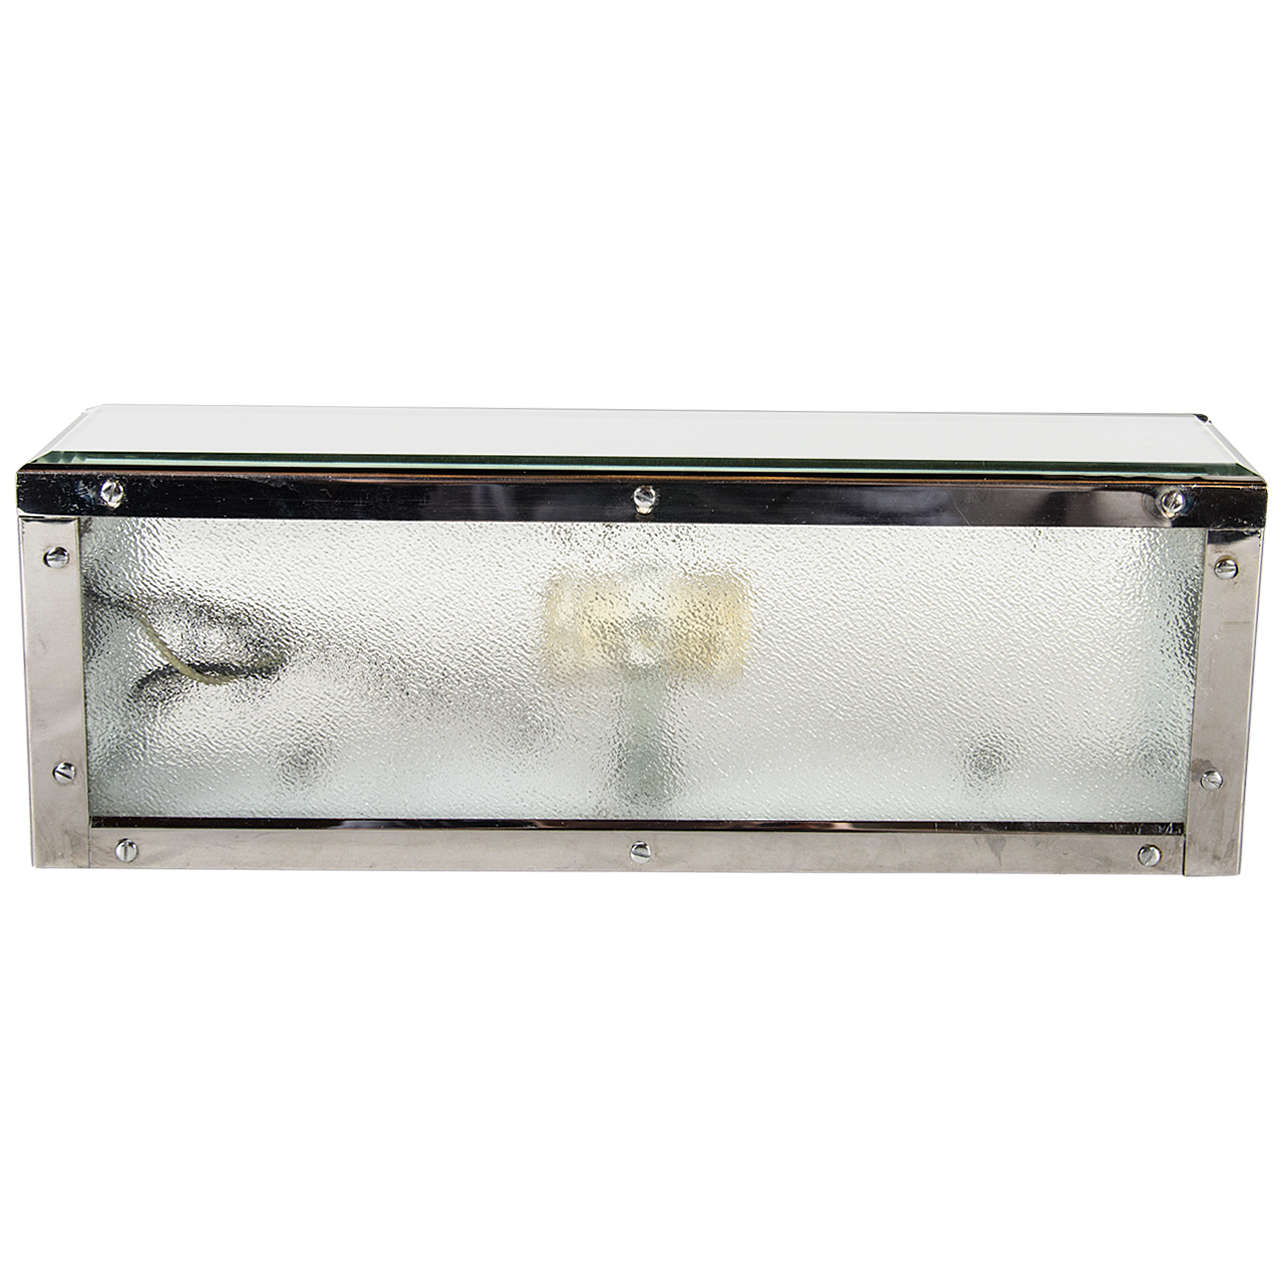 This very chic wall mounted vanity light features a surround of beveled mirror with the bottom in relief textured glass to allow the light to come through. It is fitted for two lights. The frame is chrome and this vanity light has been completely